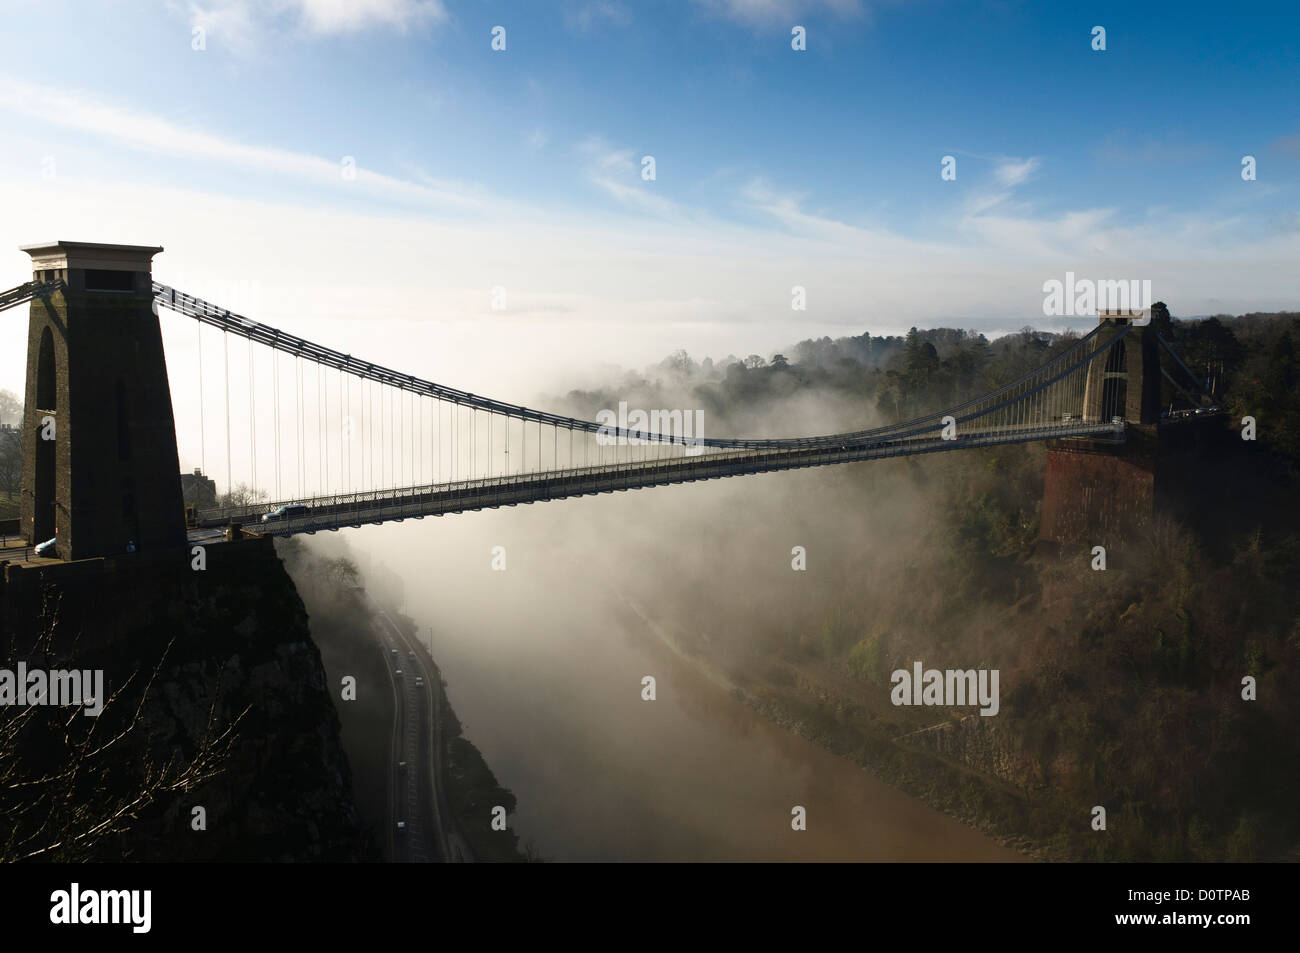 Bristol`s famous Clifton suspension bridge with low mist or cloud sitting in the Avon gorge backlit by morning sunshine. Stock Photo